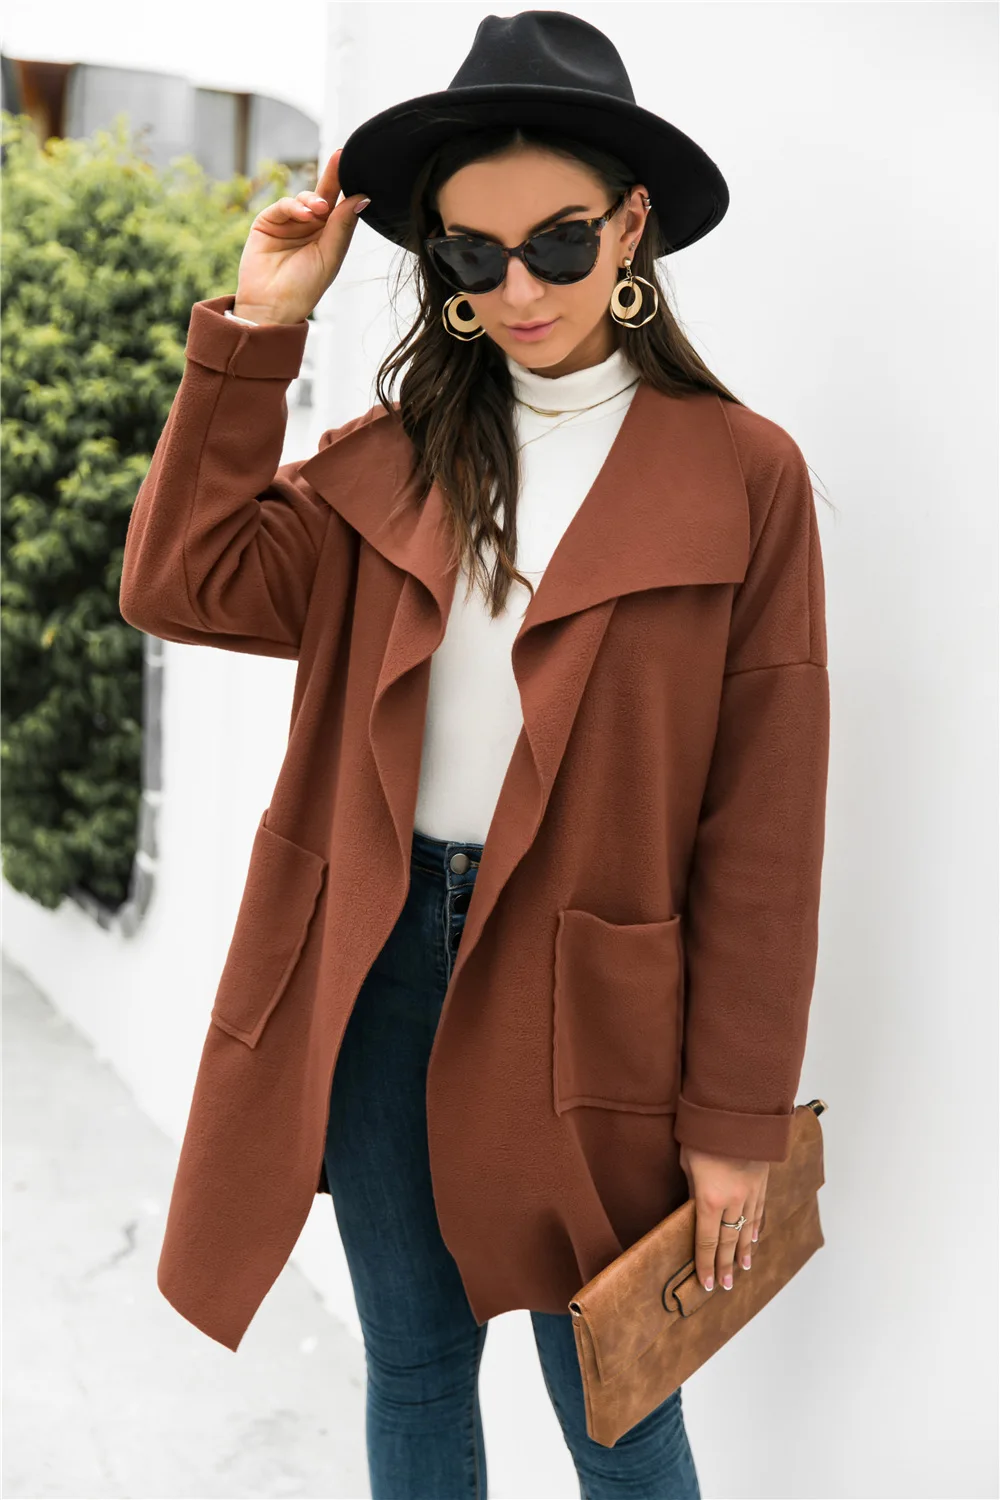 

2022 Autumn Women Jackets and Coats Winter Full Sleeve Solid Color Wool-like Elegant Fashion Office Ladies Female Outwear C4271